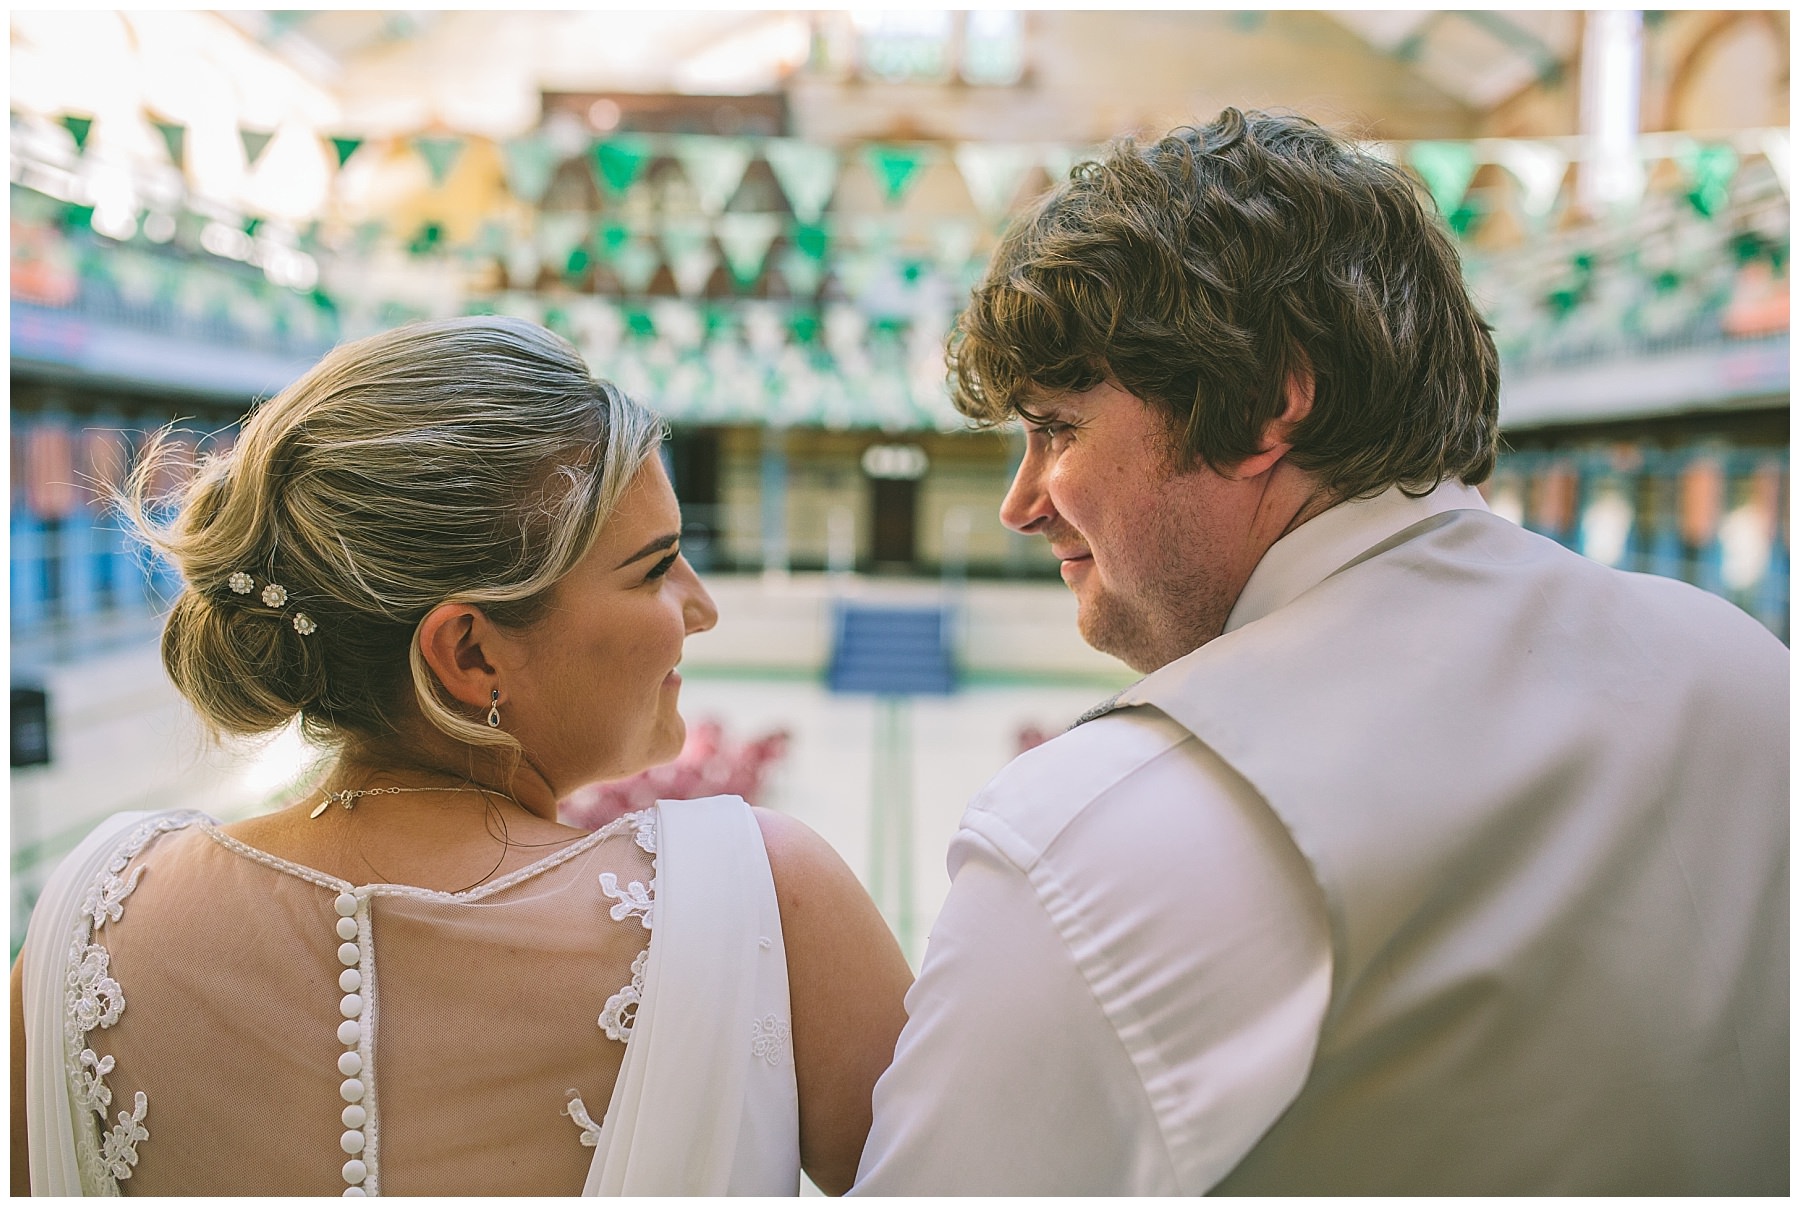 Husband and Wife share a moment at Victoria Baths